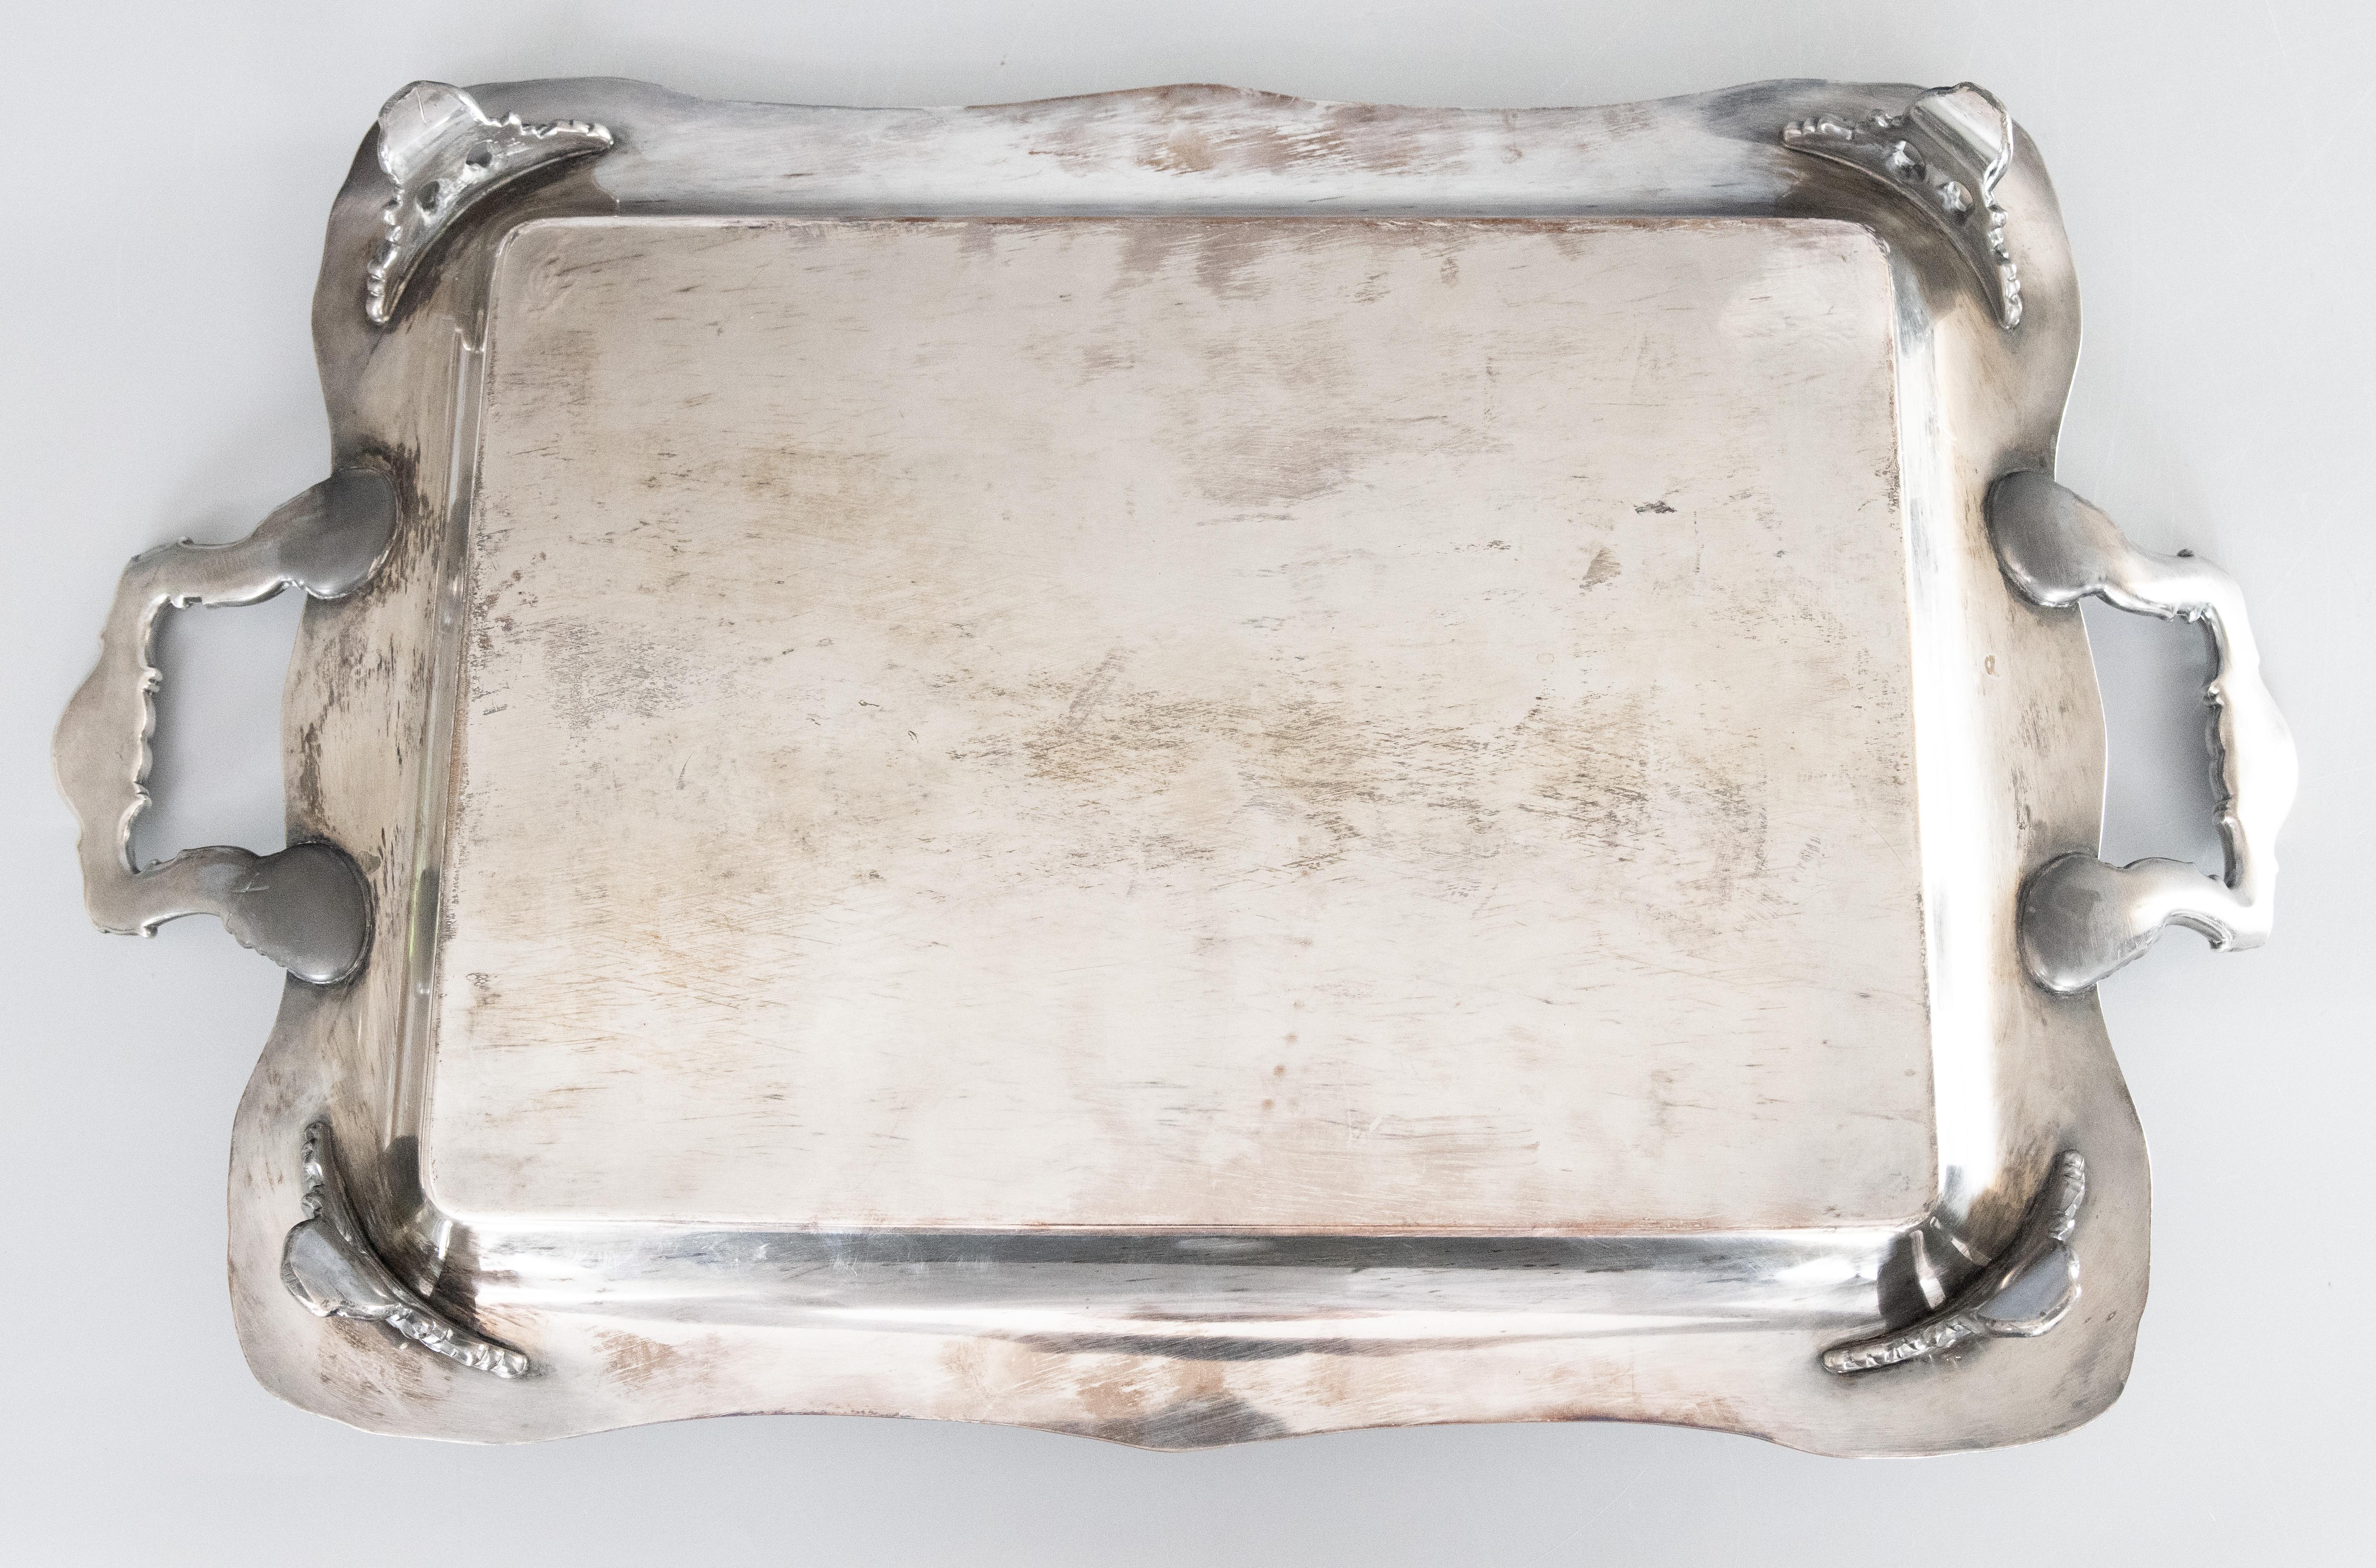 20th Century Wm Rogers Silver Plate Footed Rectangular Serving Tray With Handles, circa 1950 For Sale